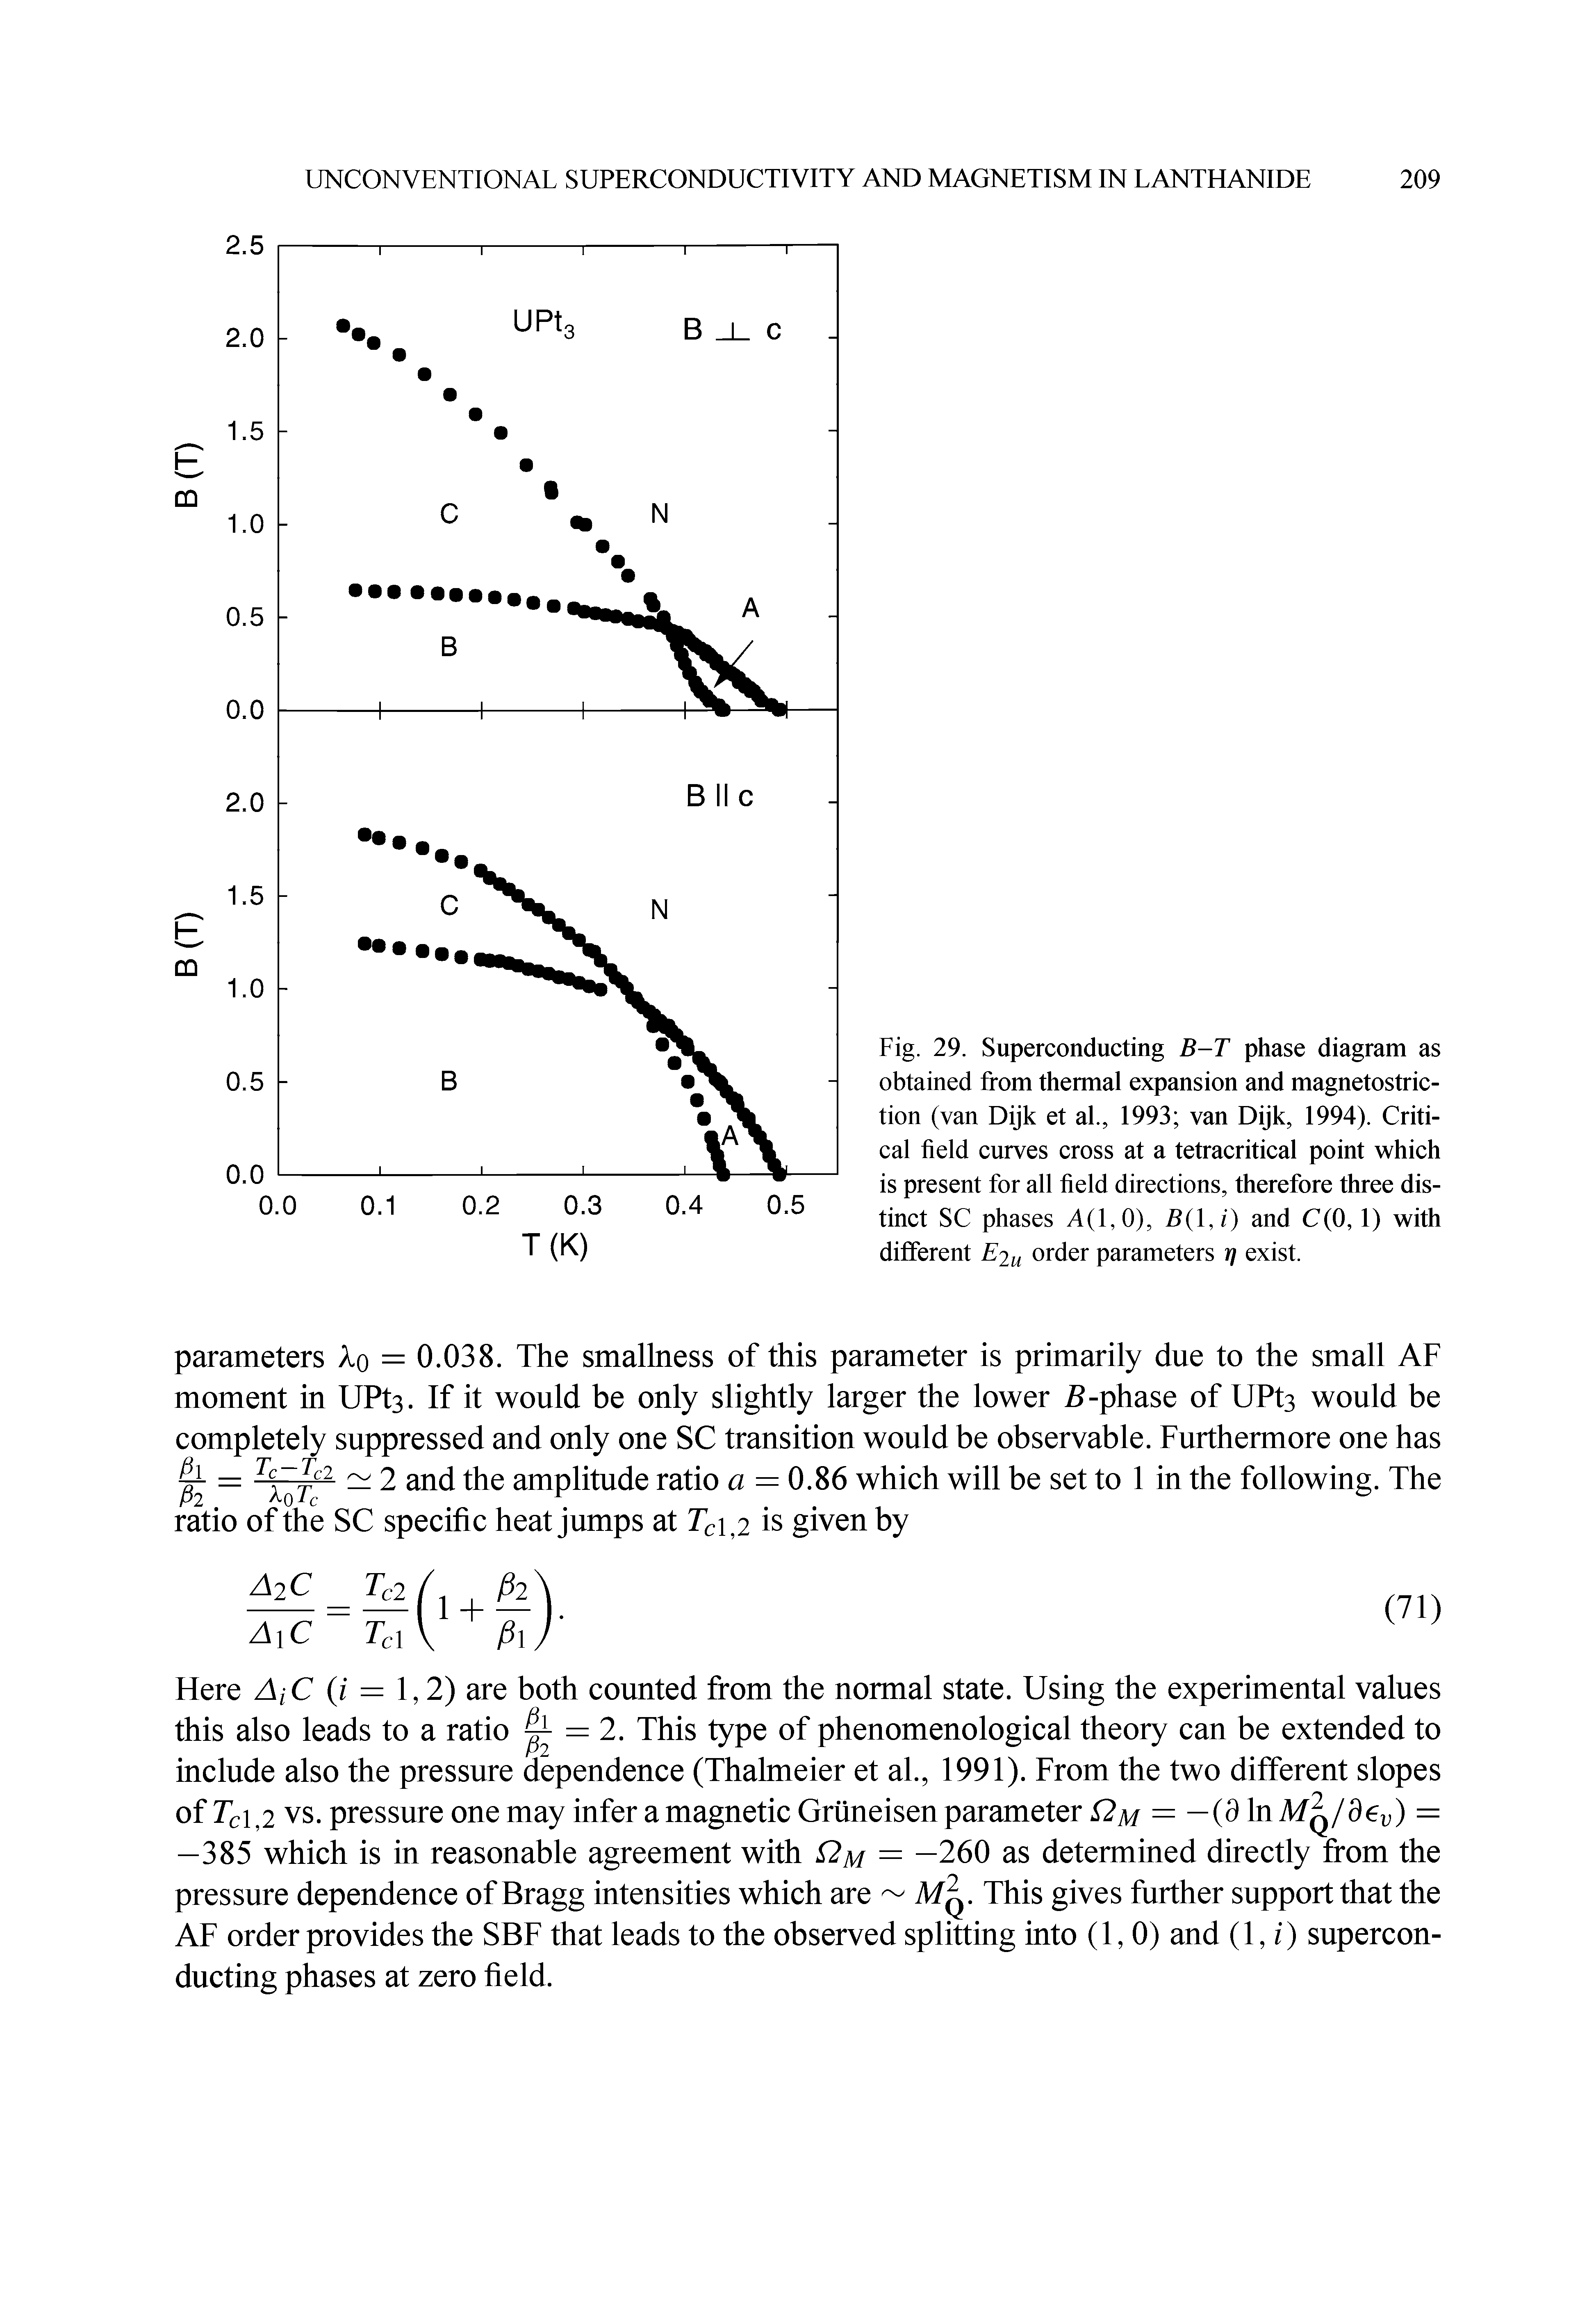 Fig. 29. Superconducting B-T phase diagram as obtained from thermal expansion and magnetostriction (van Dijk et al., 1993 van Dijk, 1994). Critical field curves cross at a tetracritical point which is present for all field directions, therefore three distinct SC phases A(1,0), and C(0,1) with...